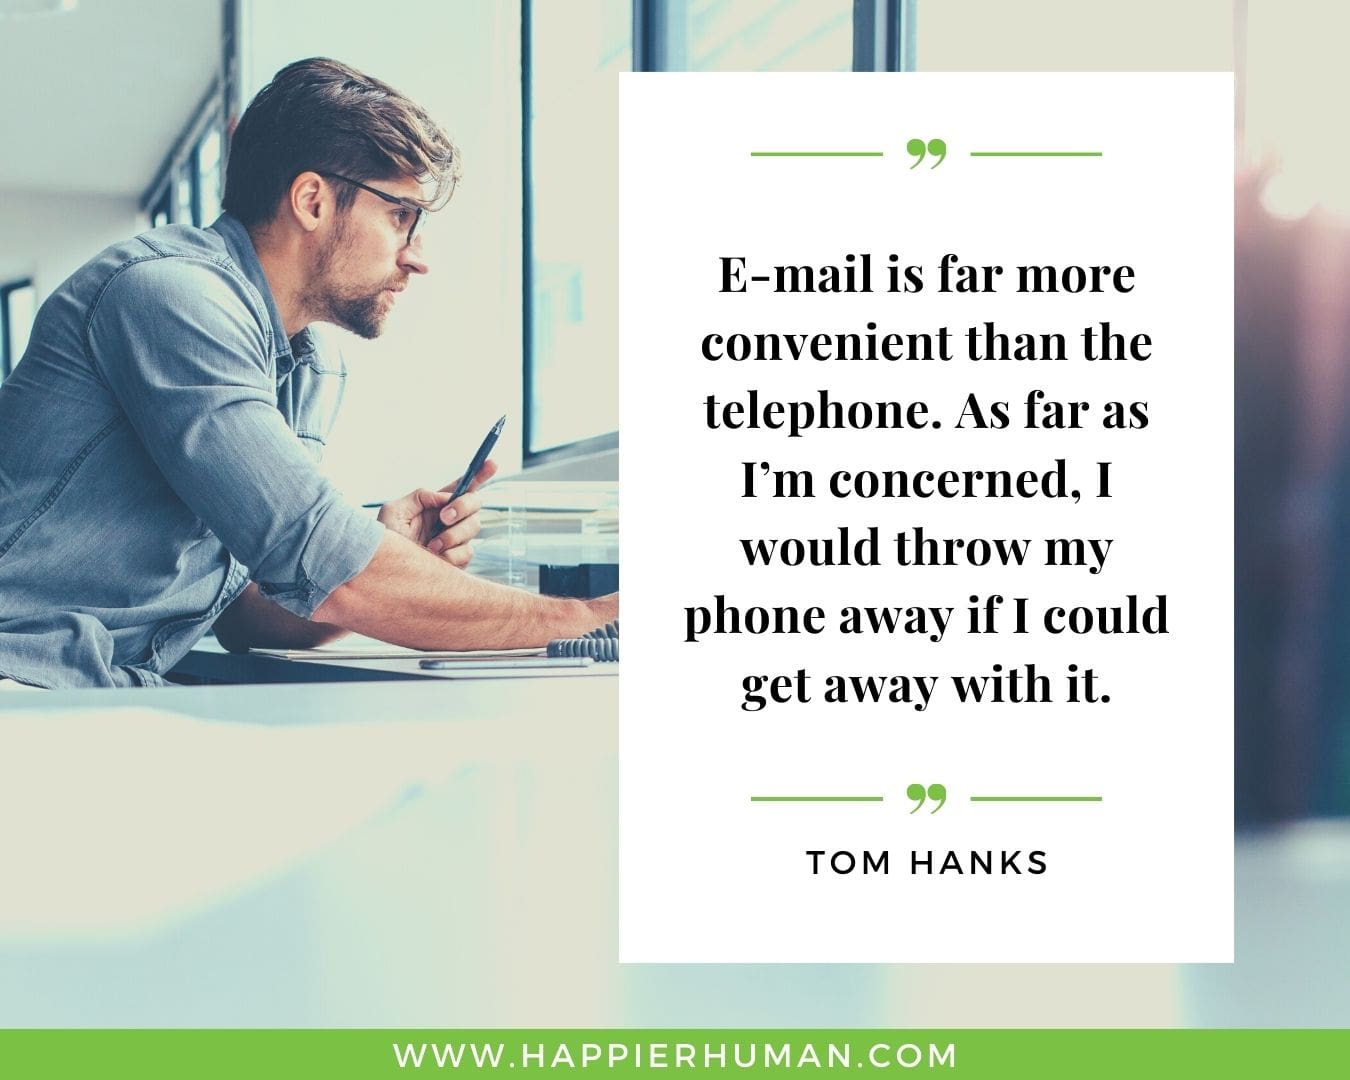 Introvert Quotes - “E-mail is far more convenient than the telephone. As far as I’m concerned, I would throw my phone away if I could get away with it.” – Tom Hanks